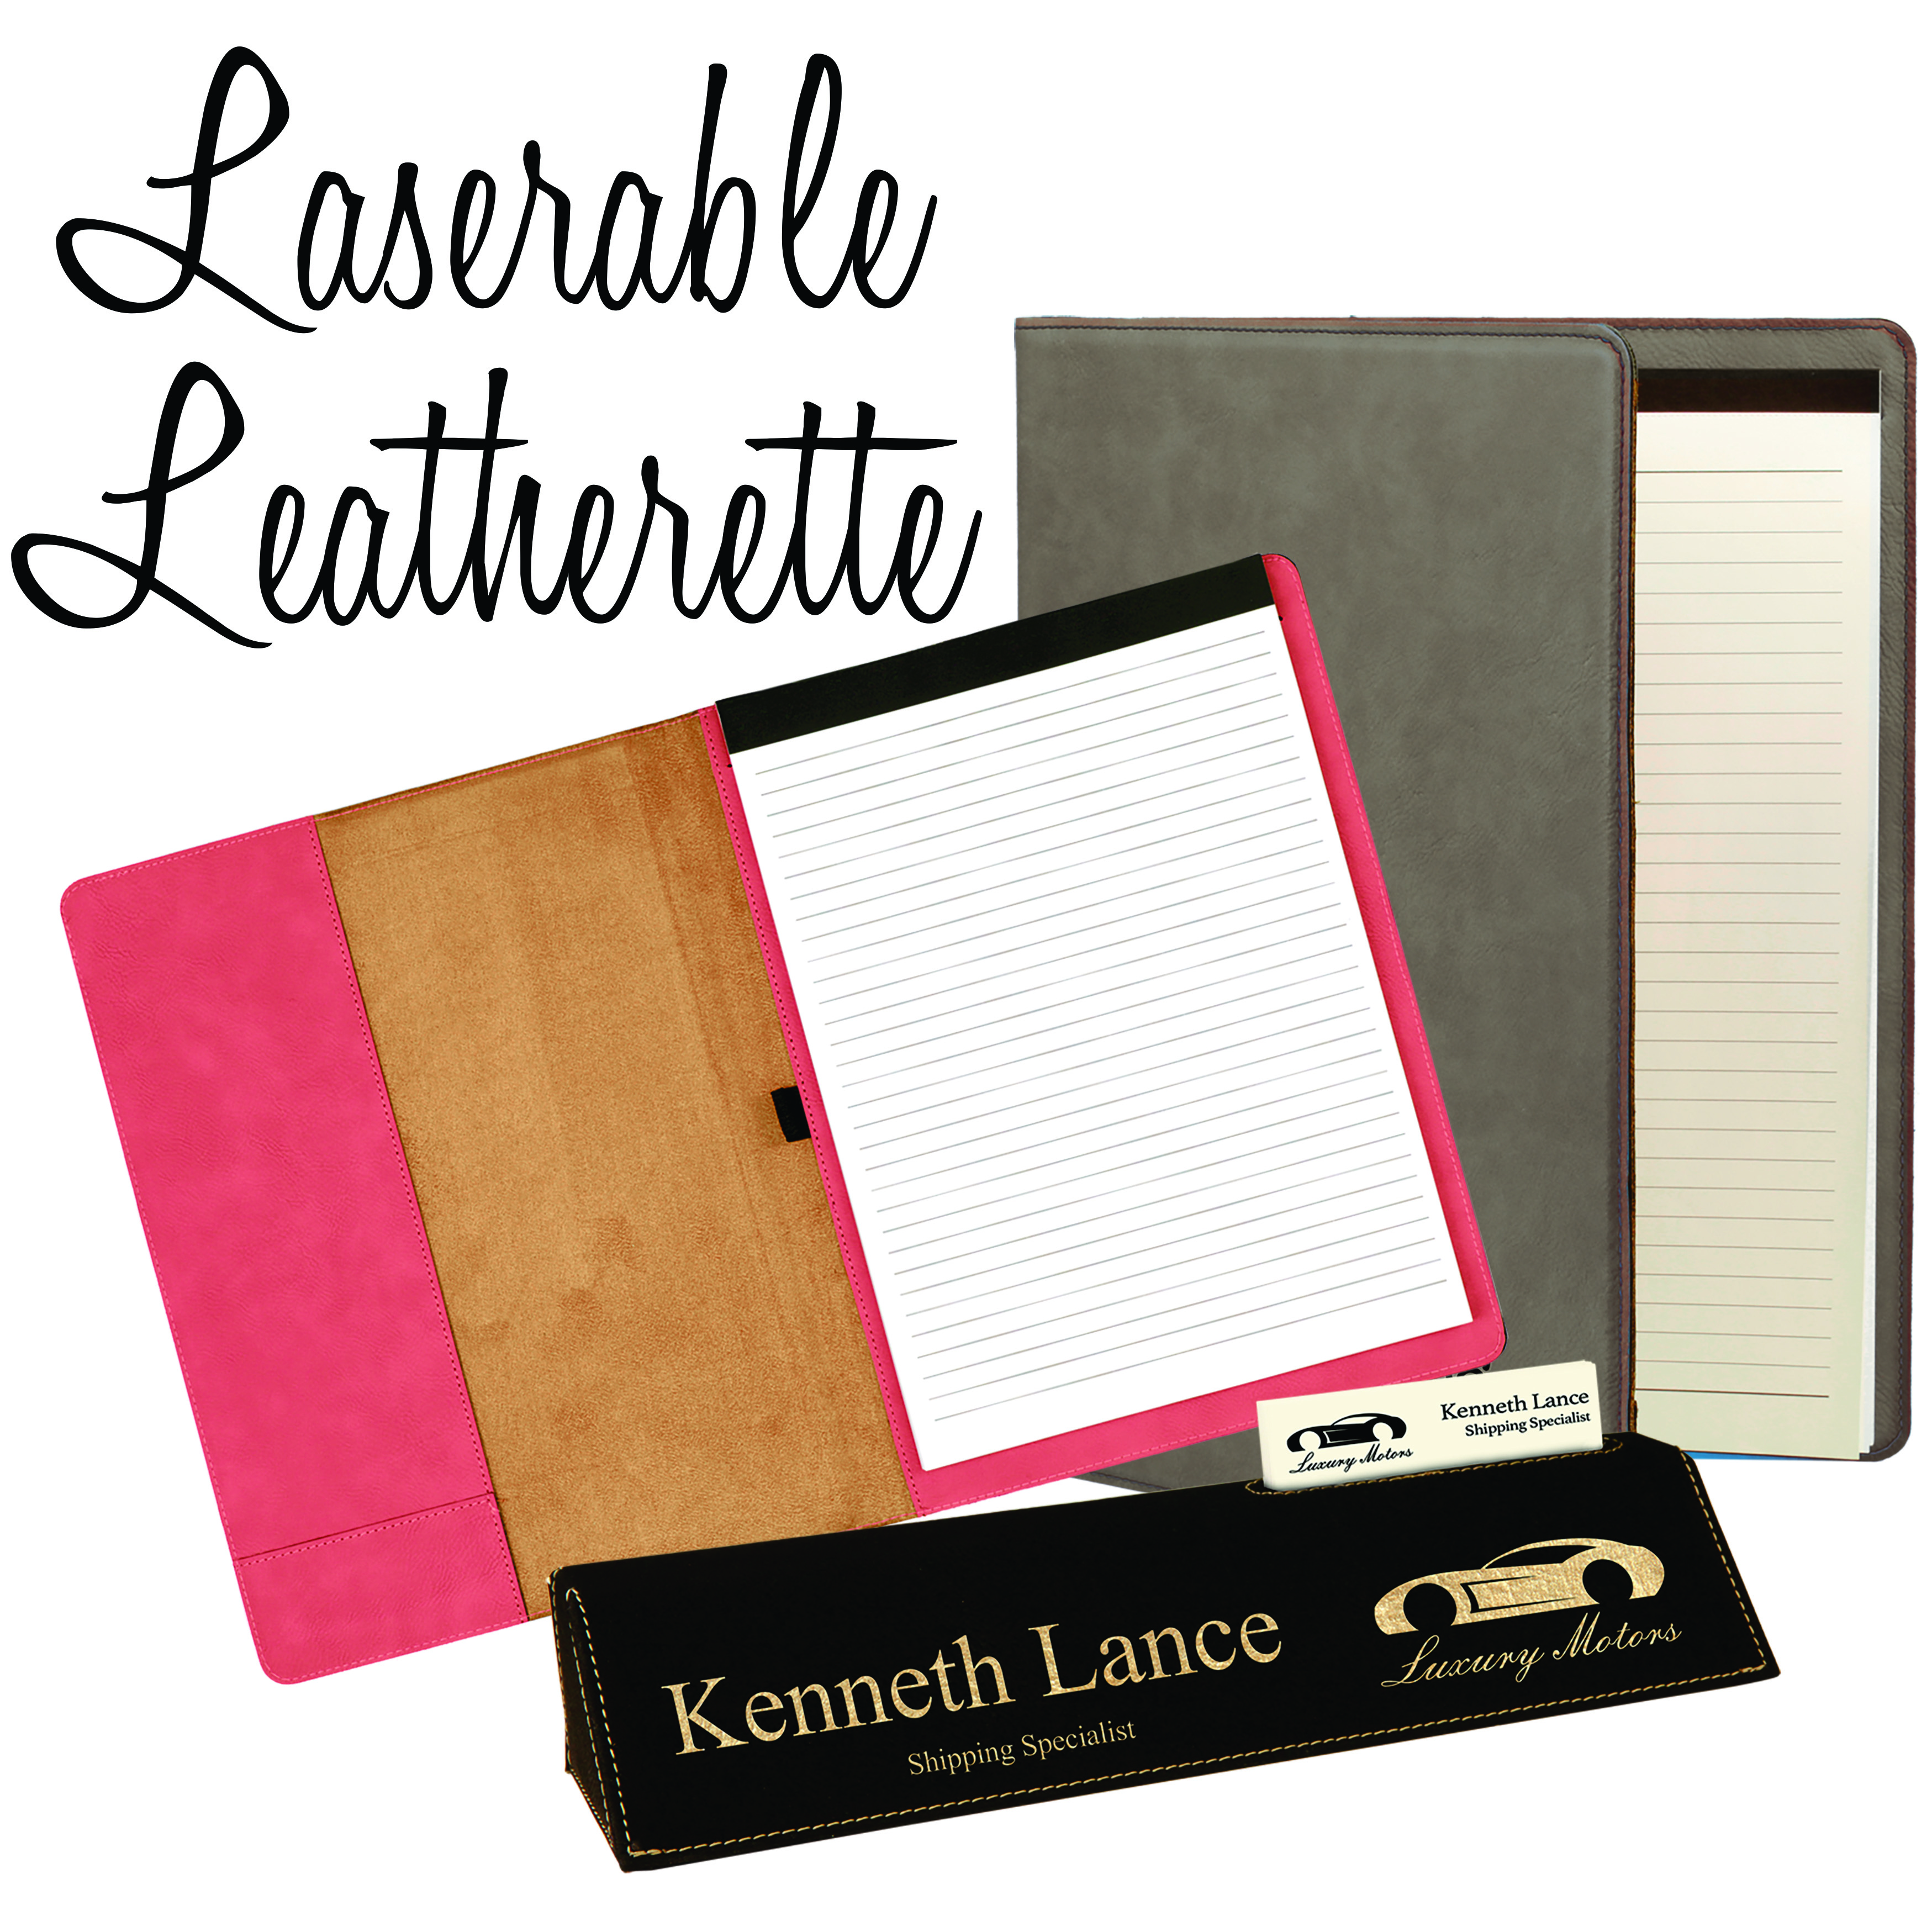 Leatherette Office Products